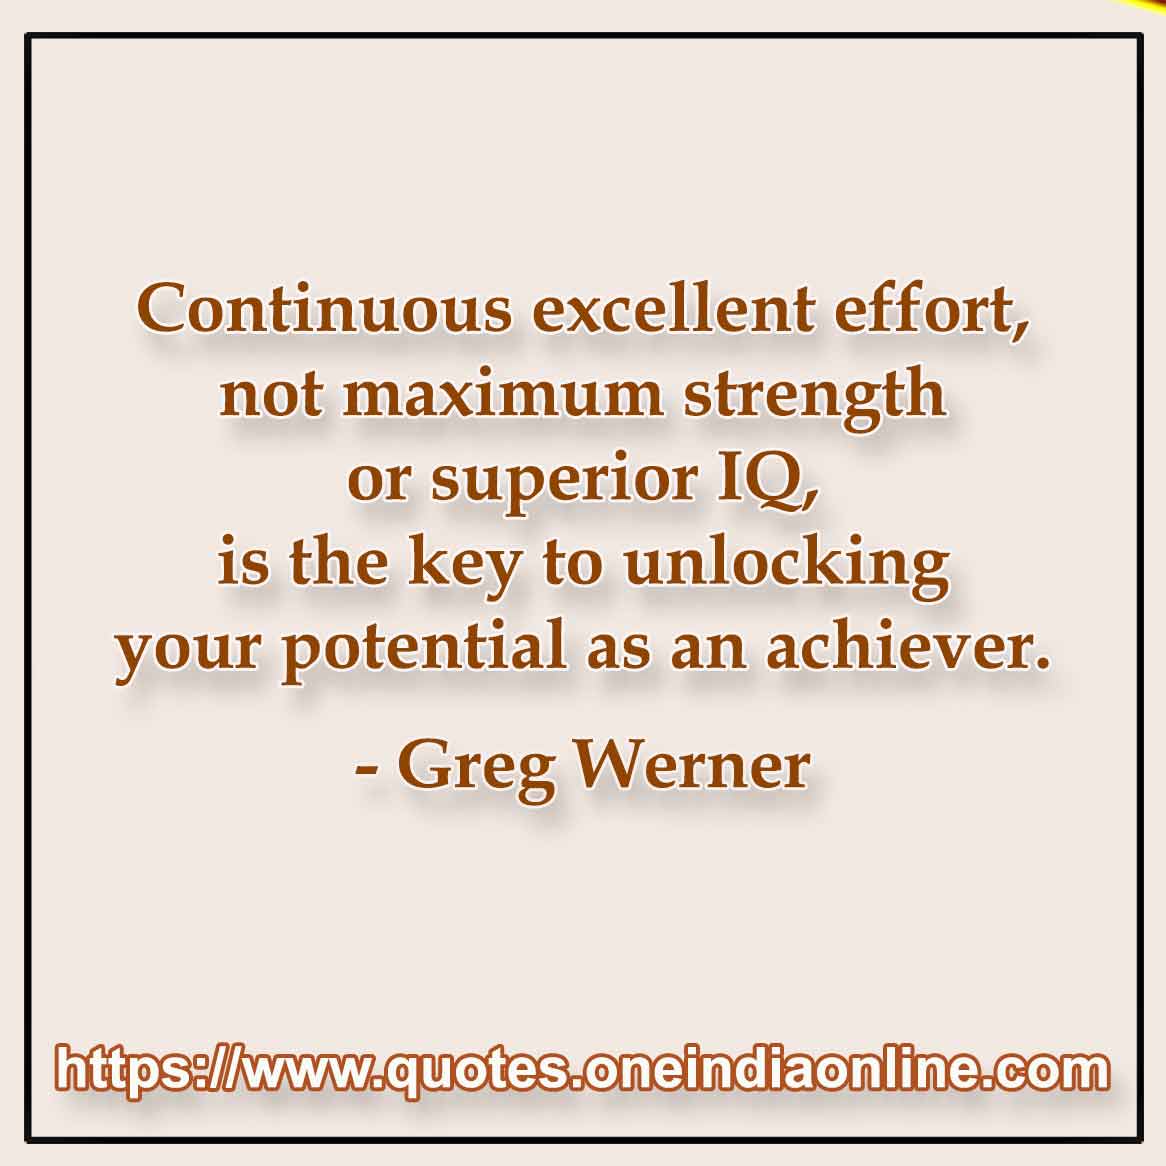 Continuous excellent effort, not maximum strength or superior IQ, is the key to unlocking your potential as an achiever.

-  Greg Werner